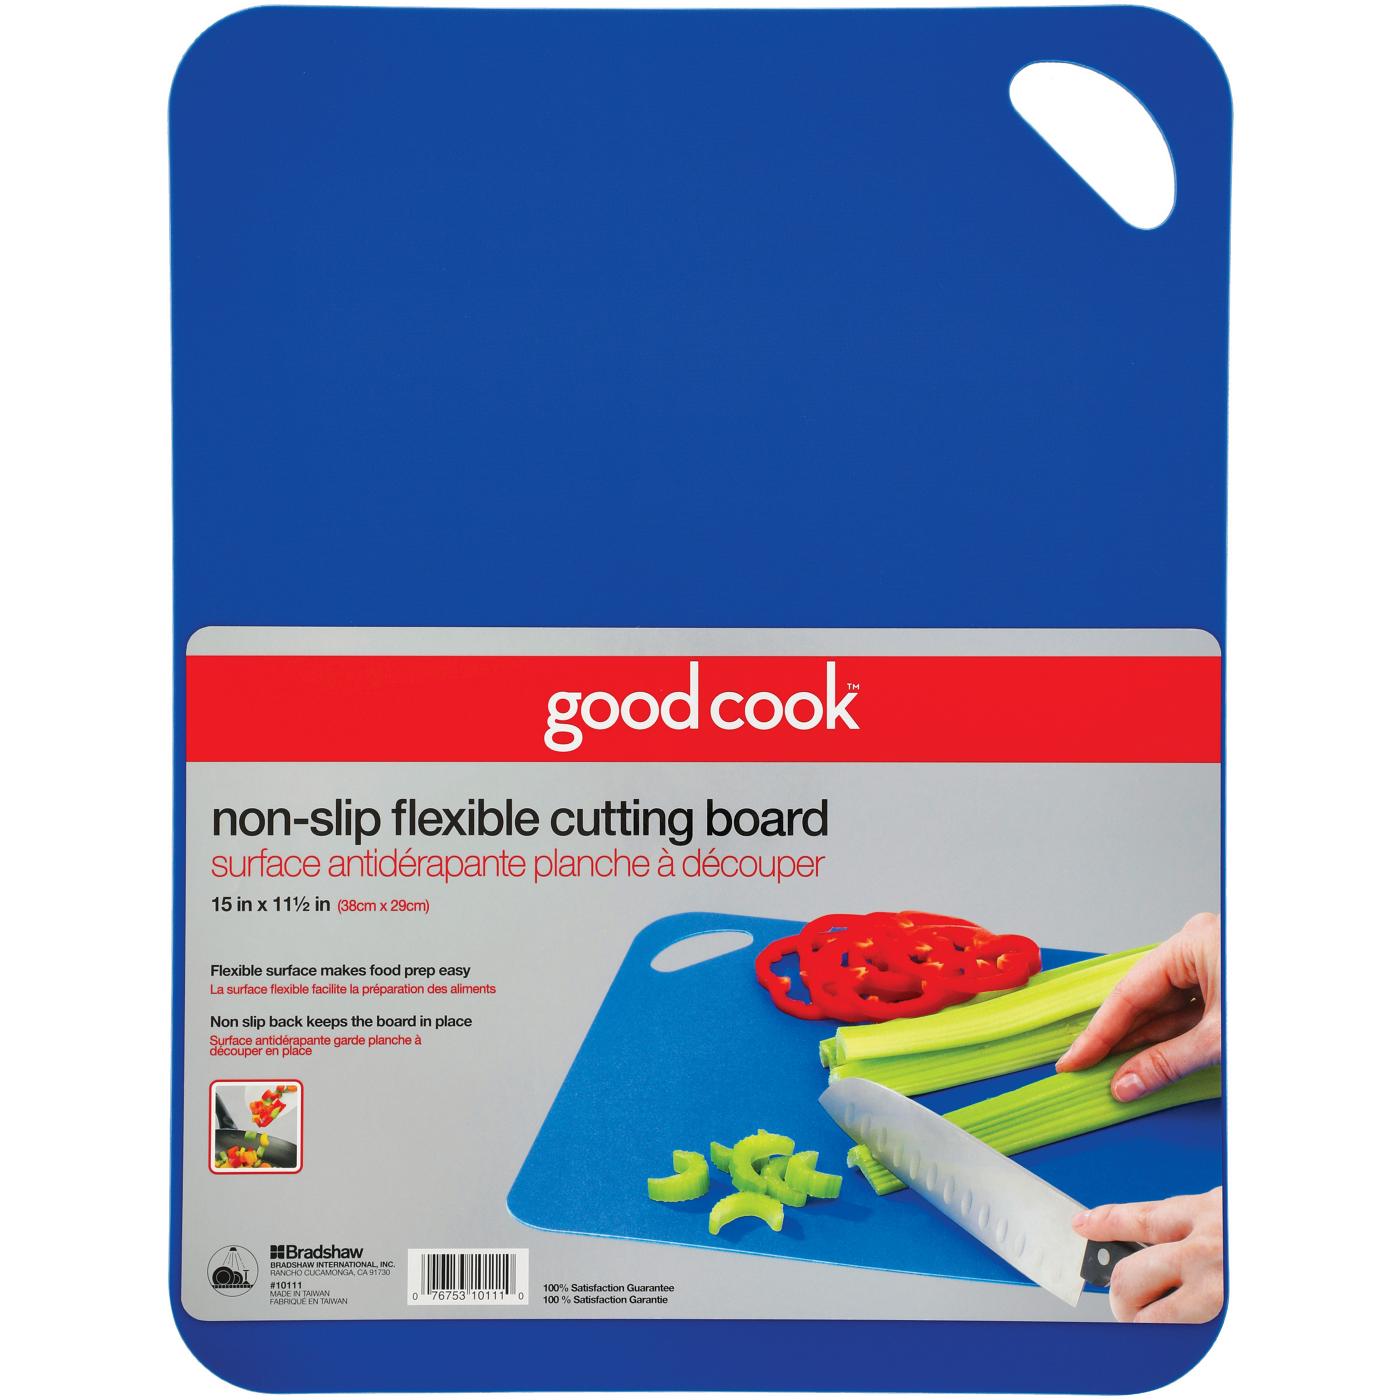 GoodCook Non-Slip Flexible Cutting Board - Assorted Colors; image 1 of 3